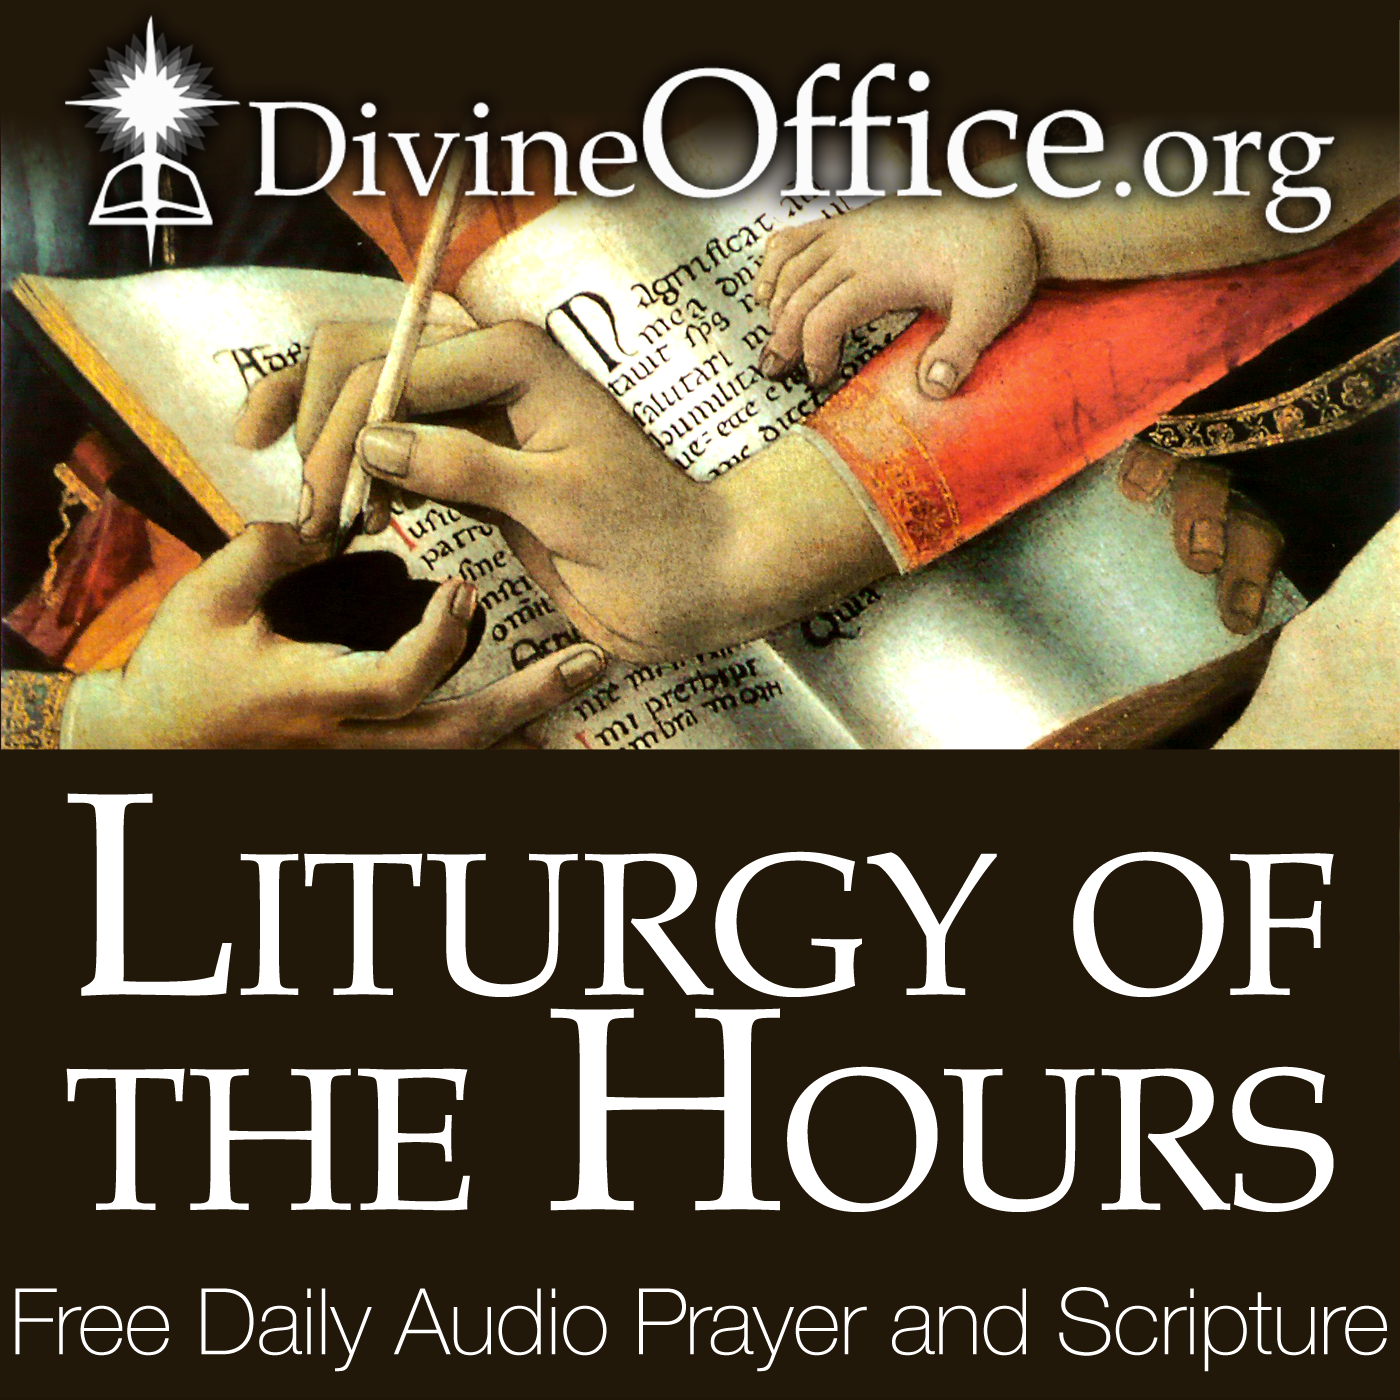 divine-office-liturgy-of-the-hours-of-the-roman-catholic-church